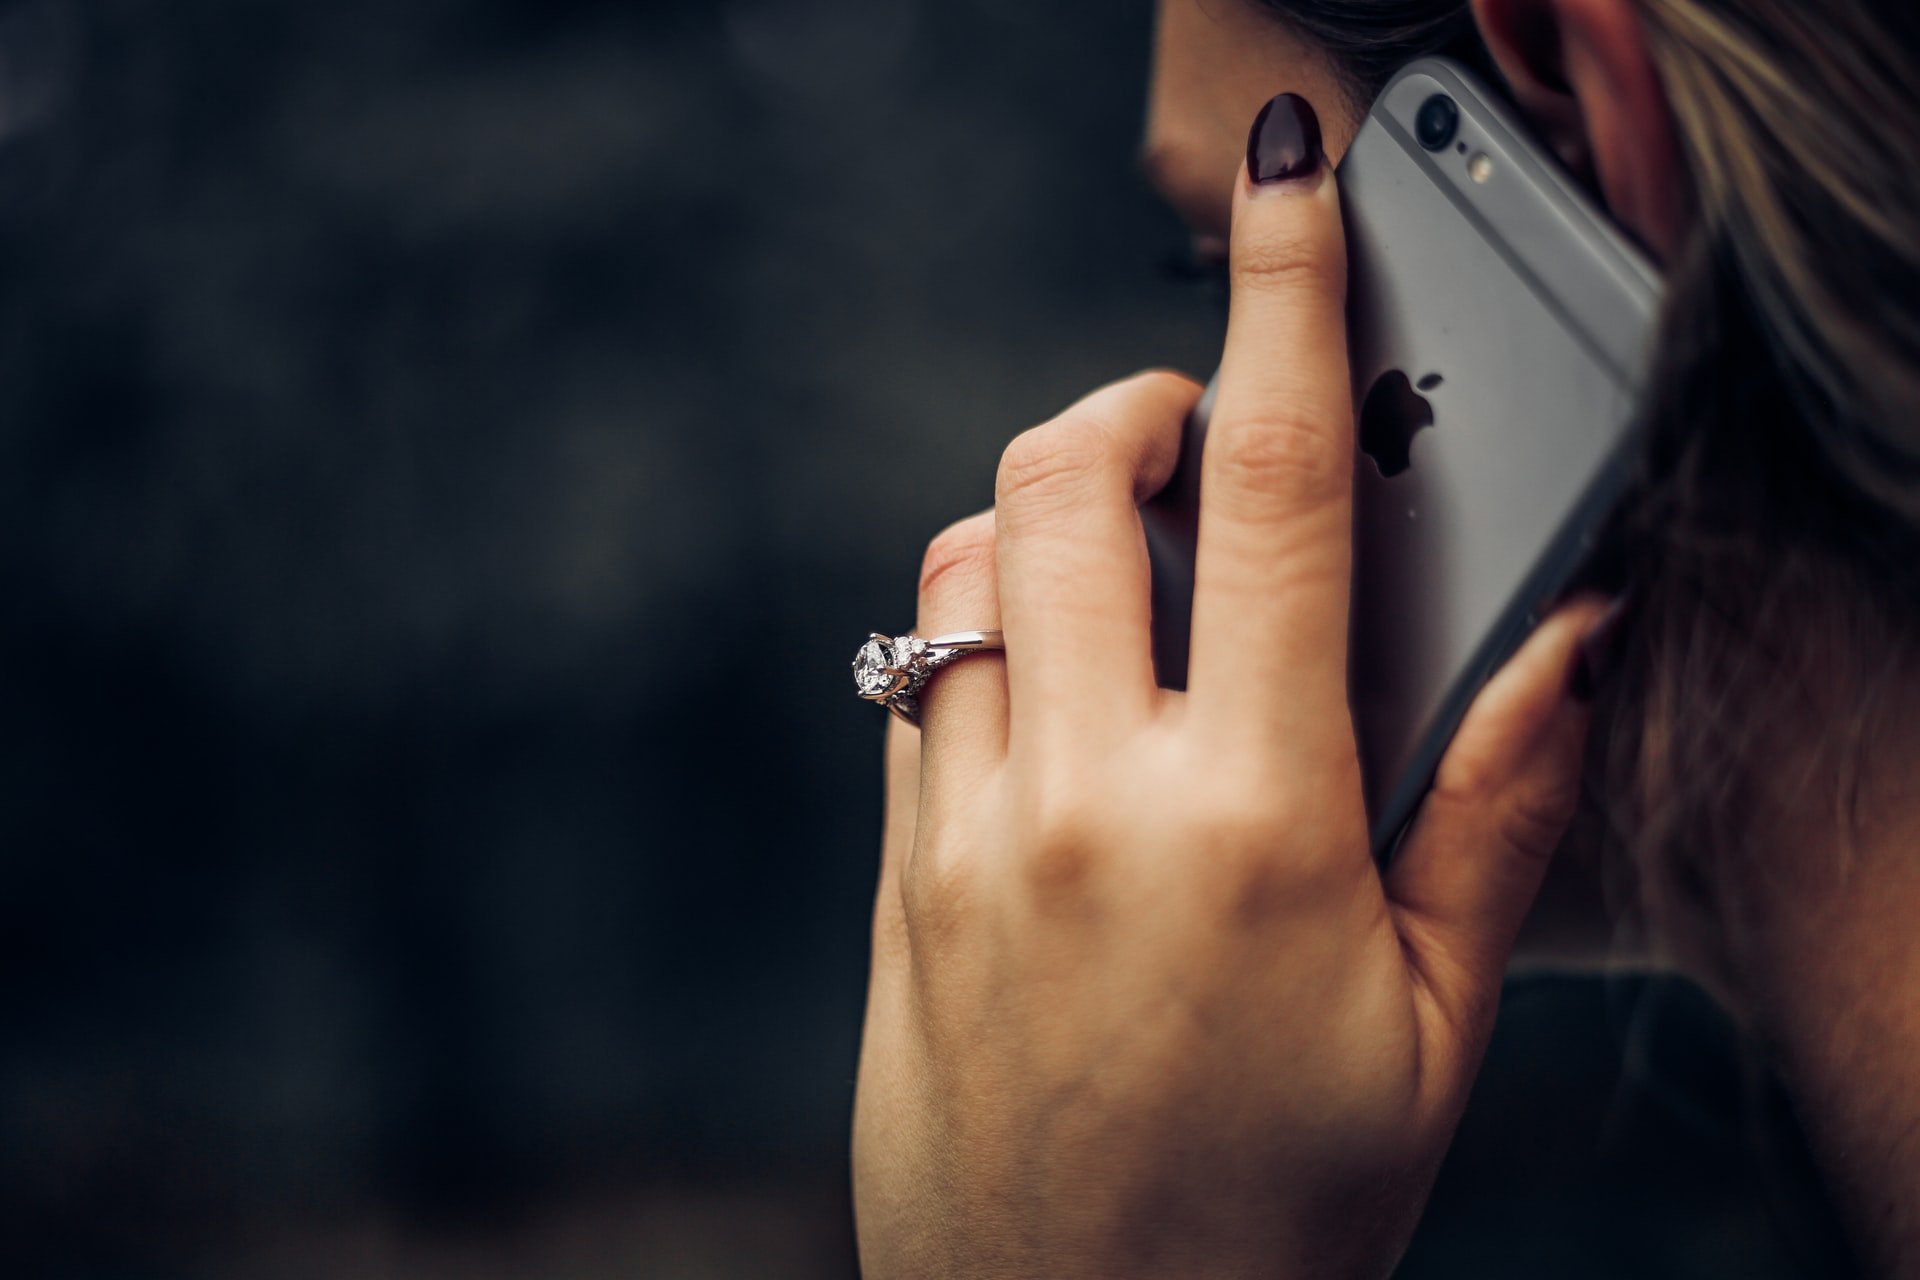 She called him but he didn't answer. | Source: Unsplash